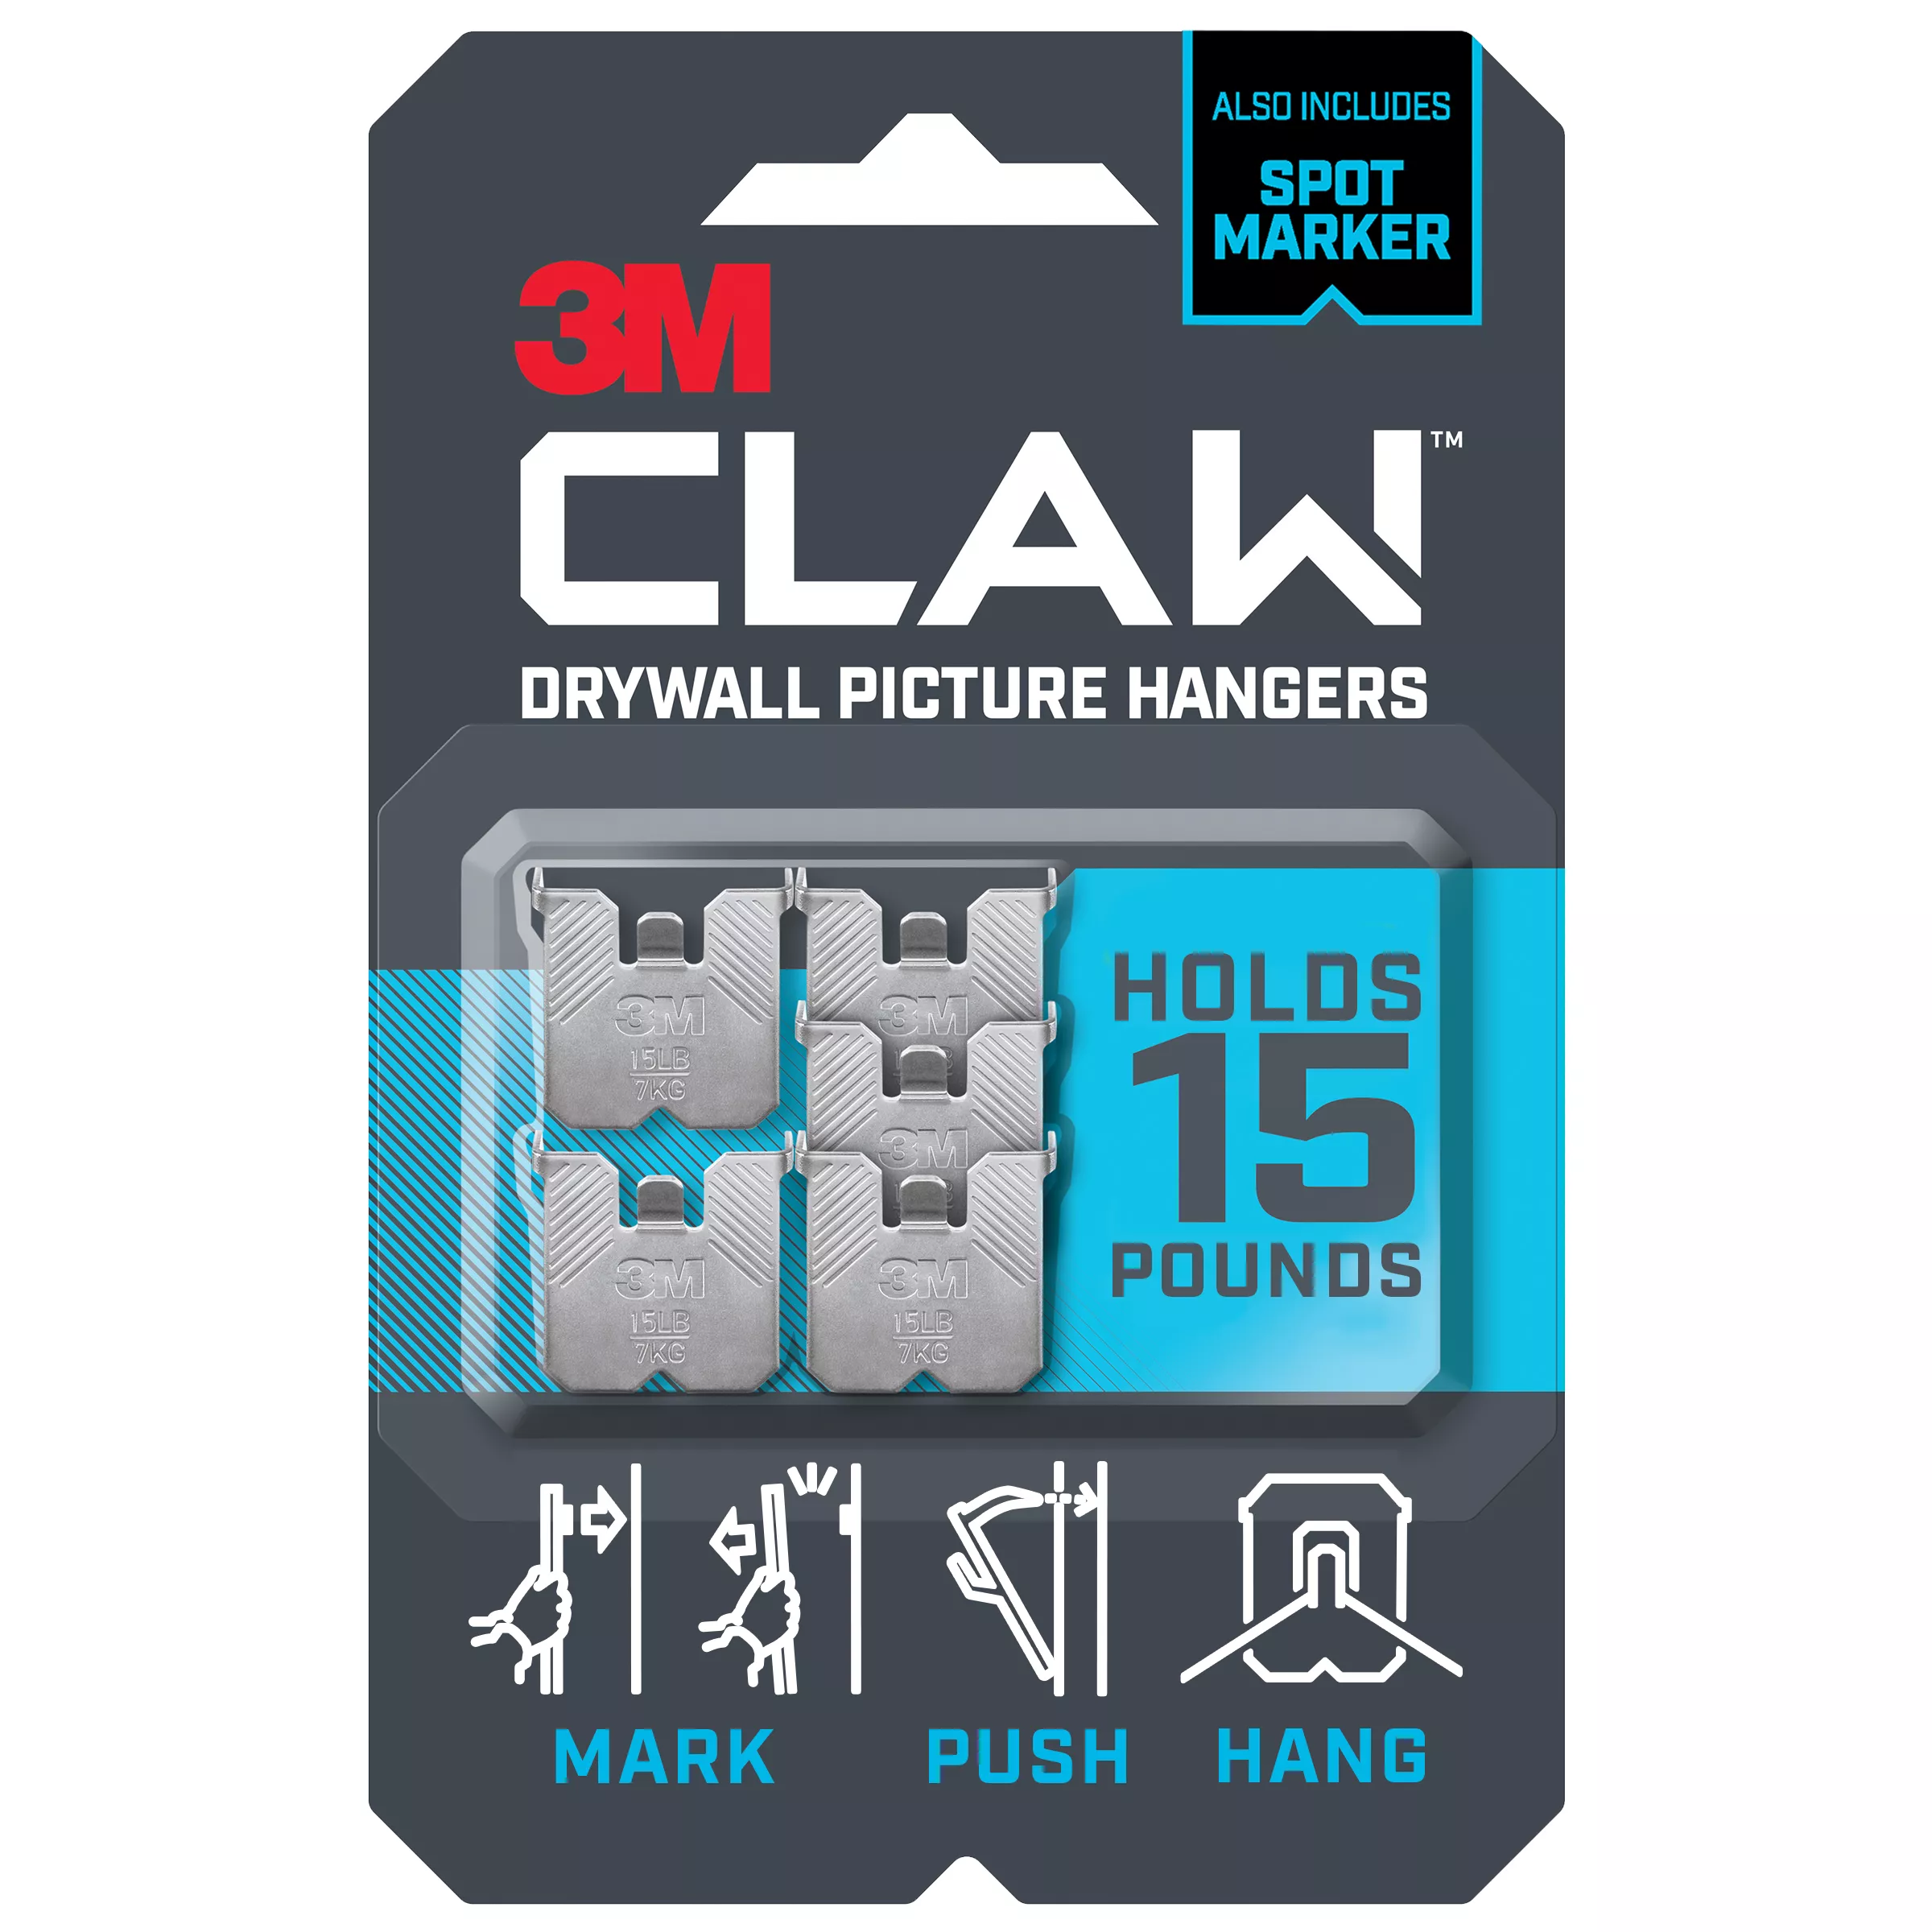 SKU 7100227268 | 3M CLAW™ Drywall Picture Hanger 15 lb with Temporary Spot Marker 3PH15M-5EF